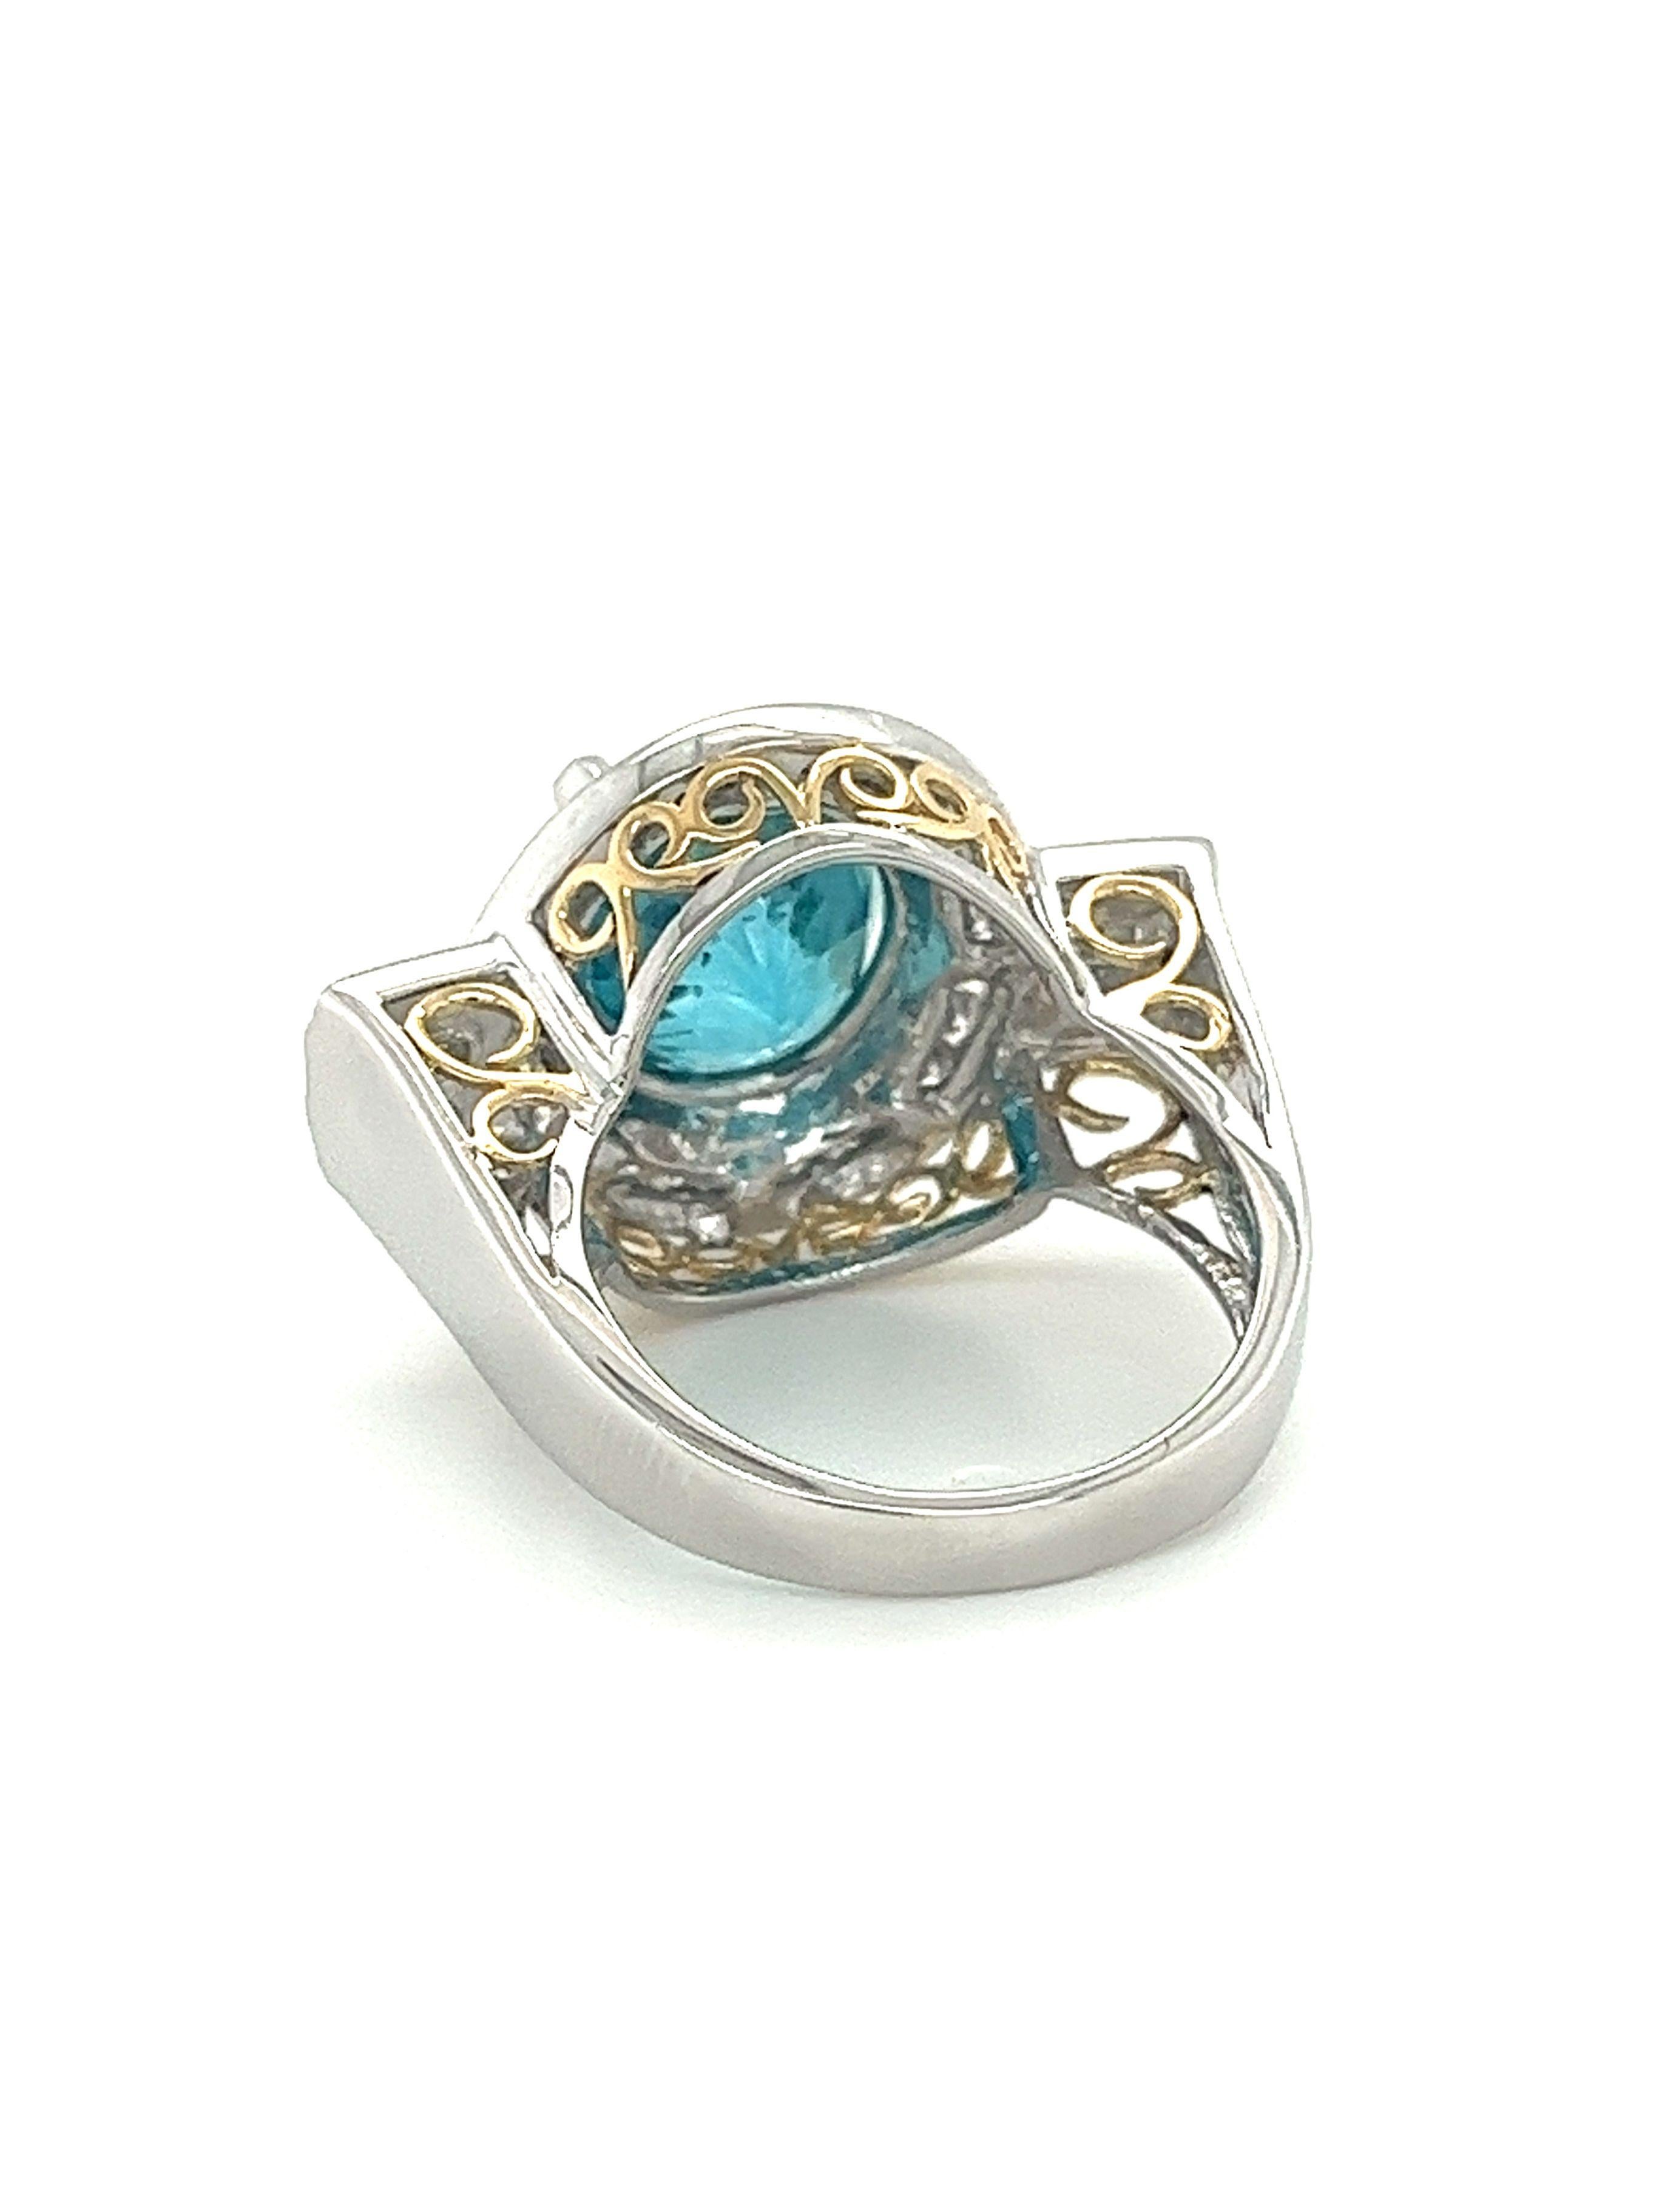 Oval Cut 8 Carat Blue Zircon with Diamond Halo in Platinum & 18K Gold Filigree Ring  For Sale